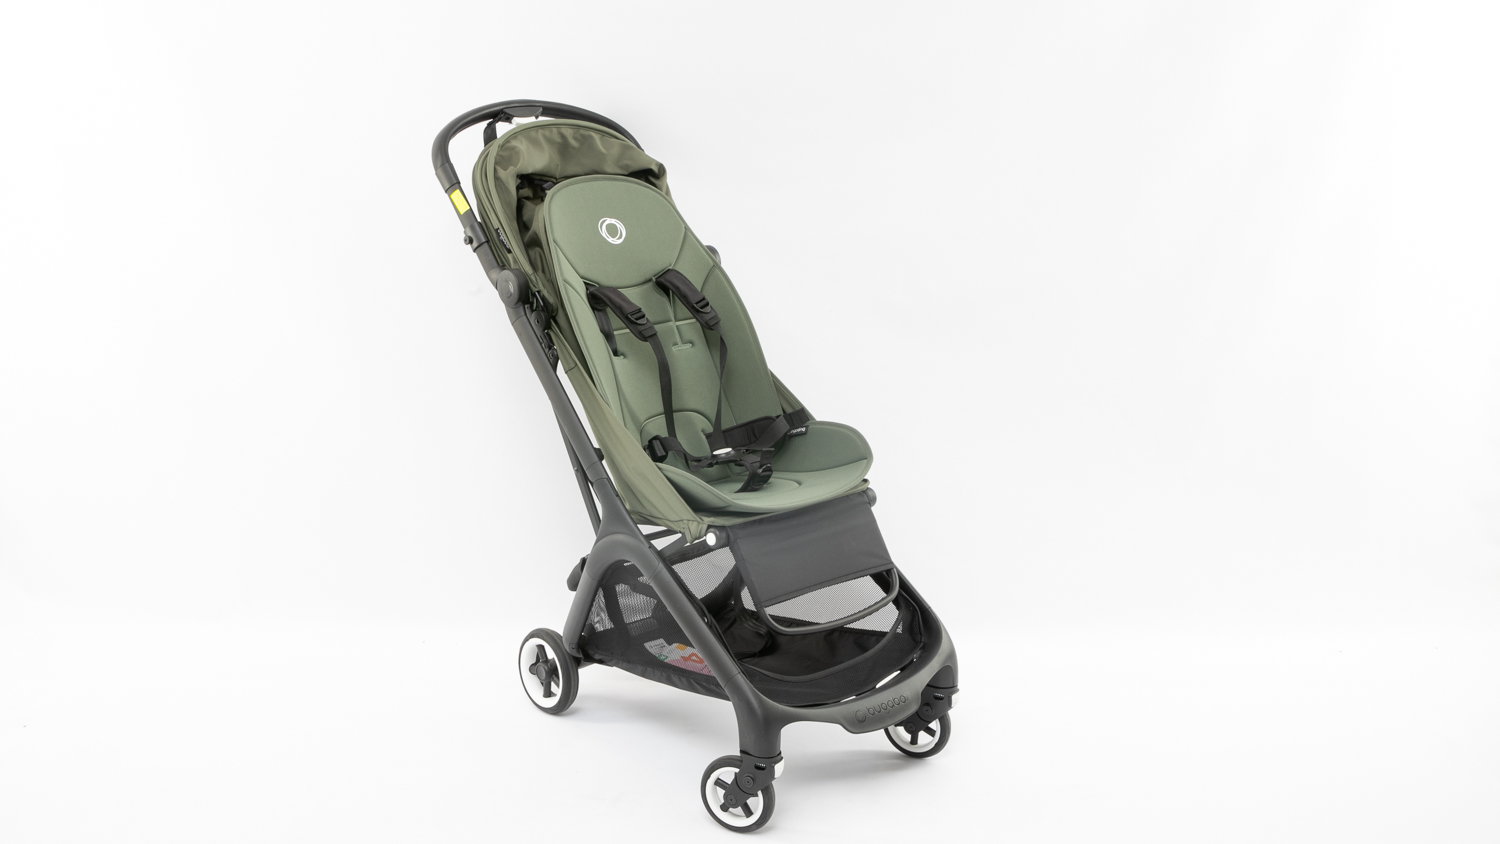 Bugaboo Butterfly Stroller – Experience Uncompromised Quality